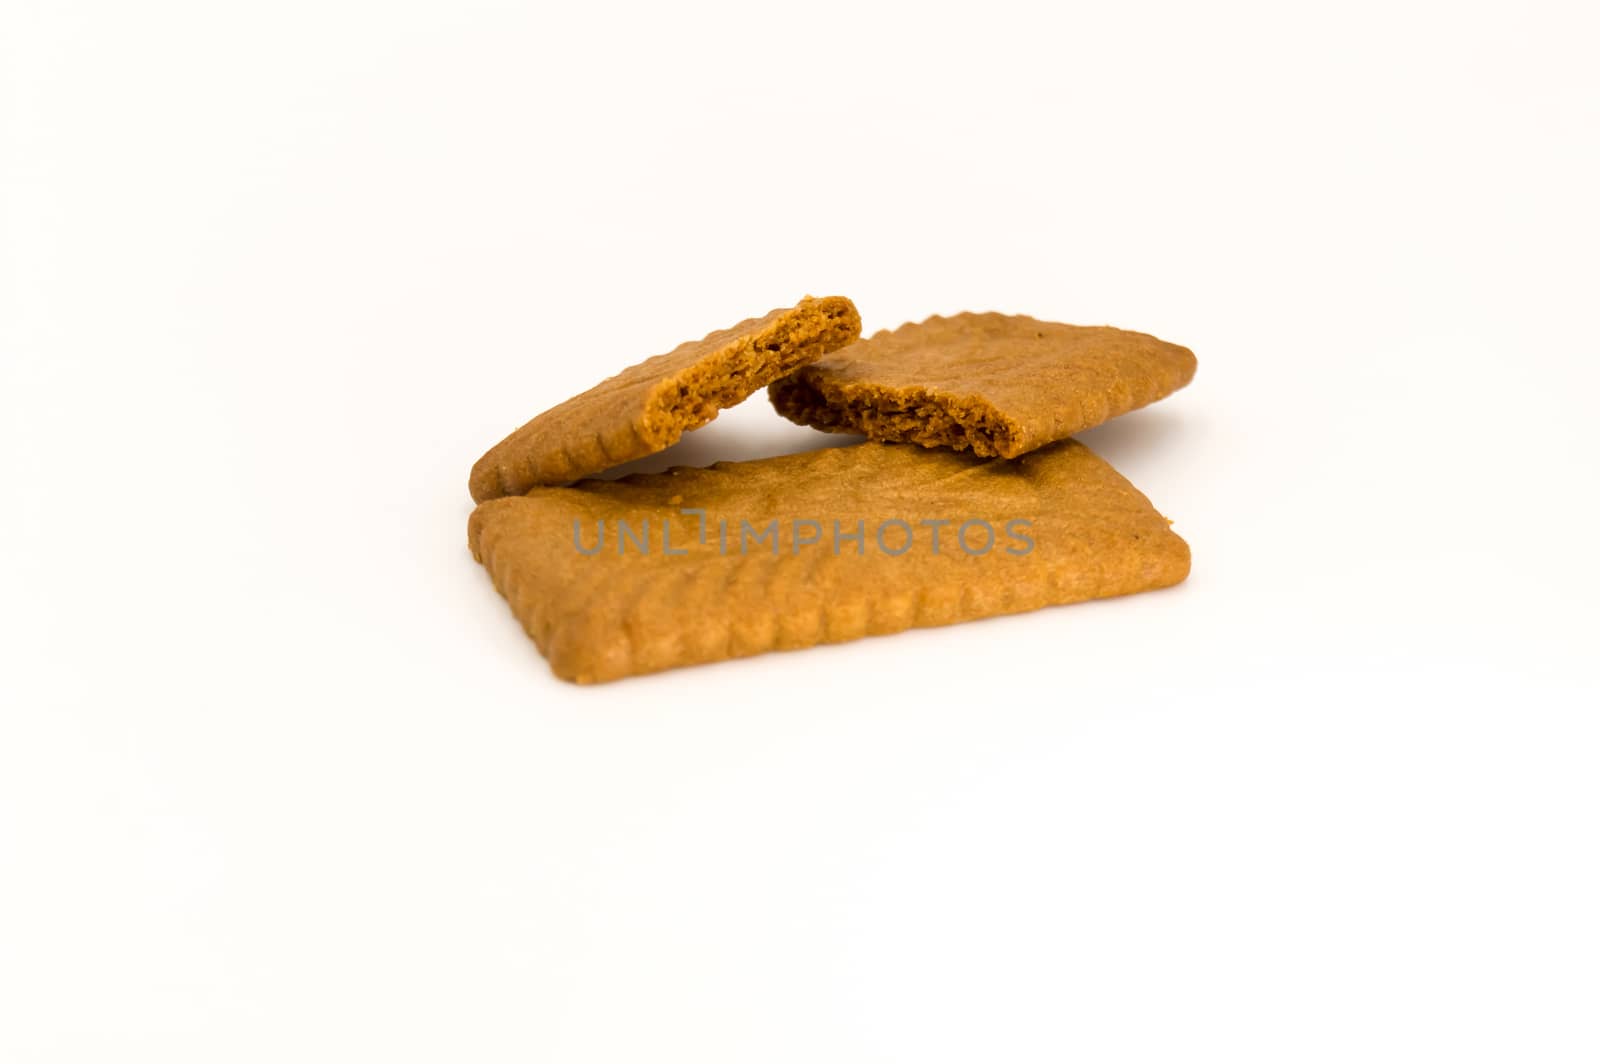 Speculoos cakes of rectangular shape on a white background